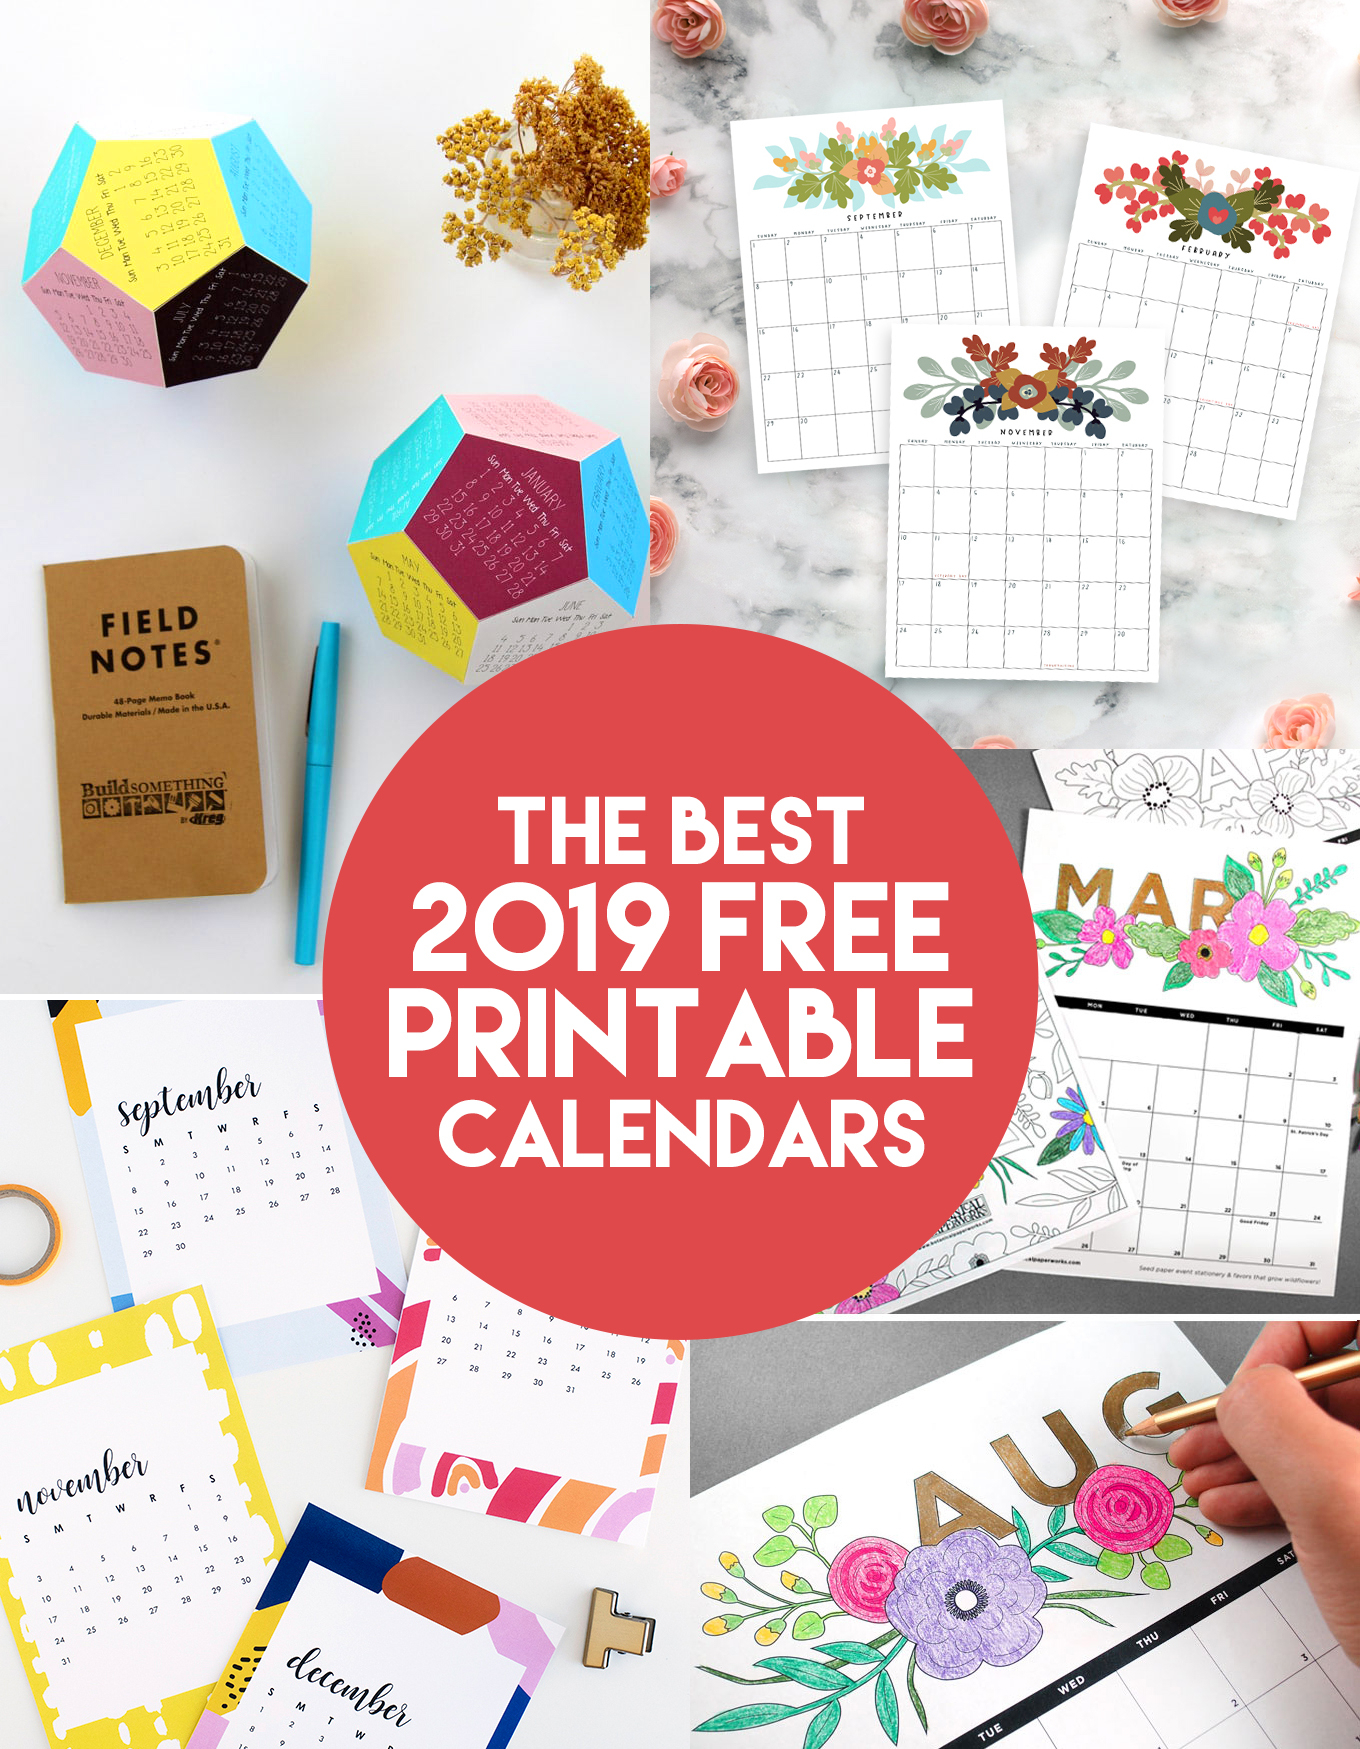 The Best 2019 Free Printable Calendars - The Craft Patch